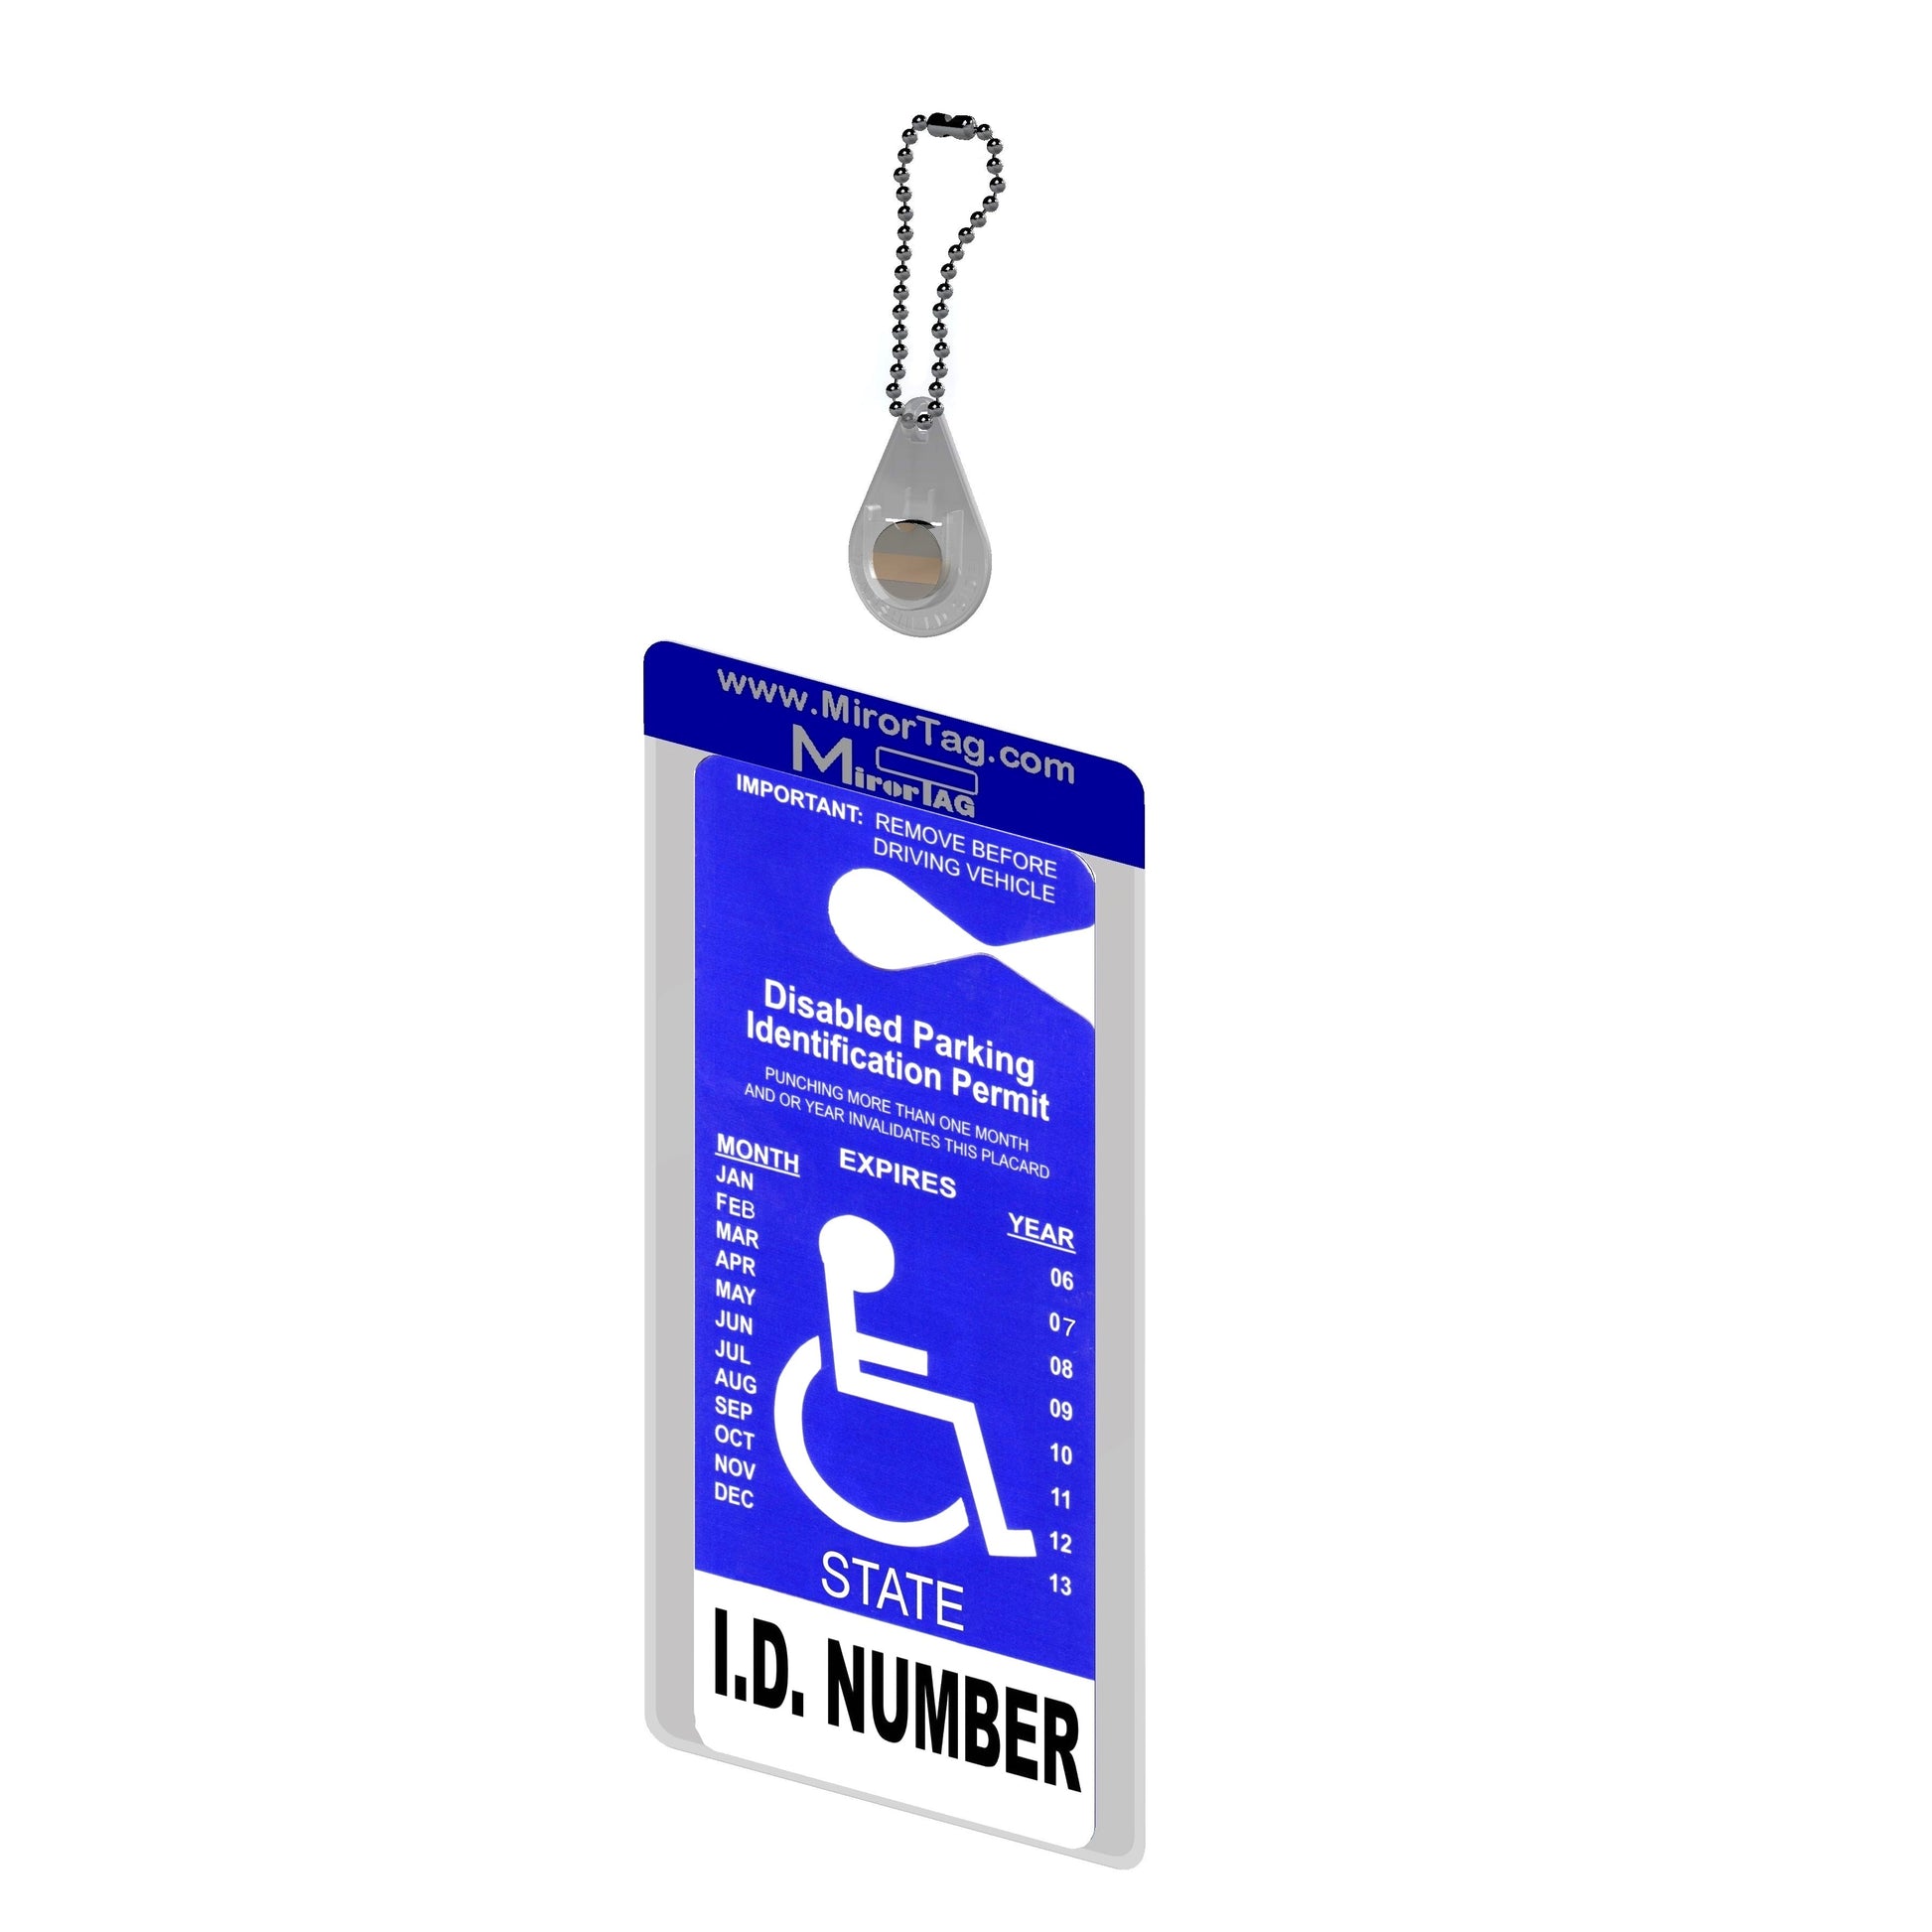 Mirortag Charm, holder and protector for handicap parking placard. magnetically attach and detach tag